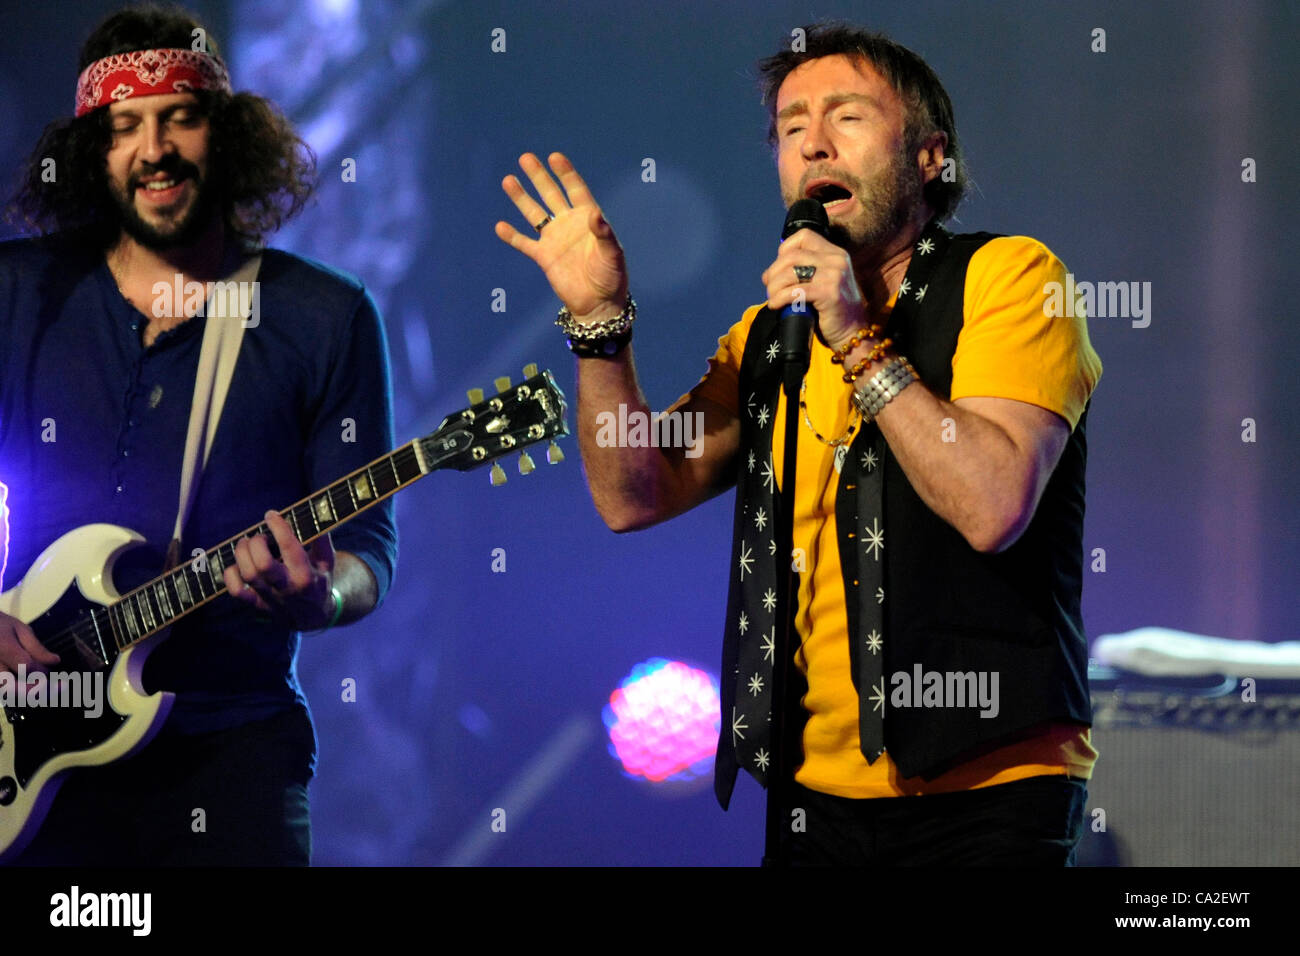 March 24, 2012 - Toronto, Cananda - Paul Rodgers performs on stage with The Sheepdogs at the 12th Annual Indies Awards during the 2012 Slacker Canadian Music Week. (DCP/BRP/N8N) Stock Photo